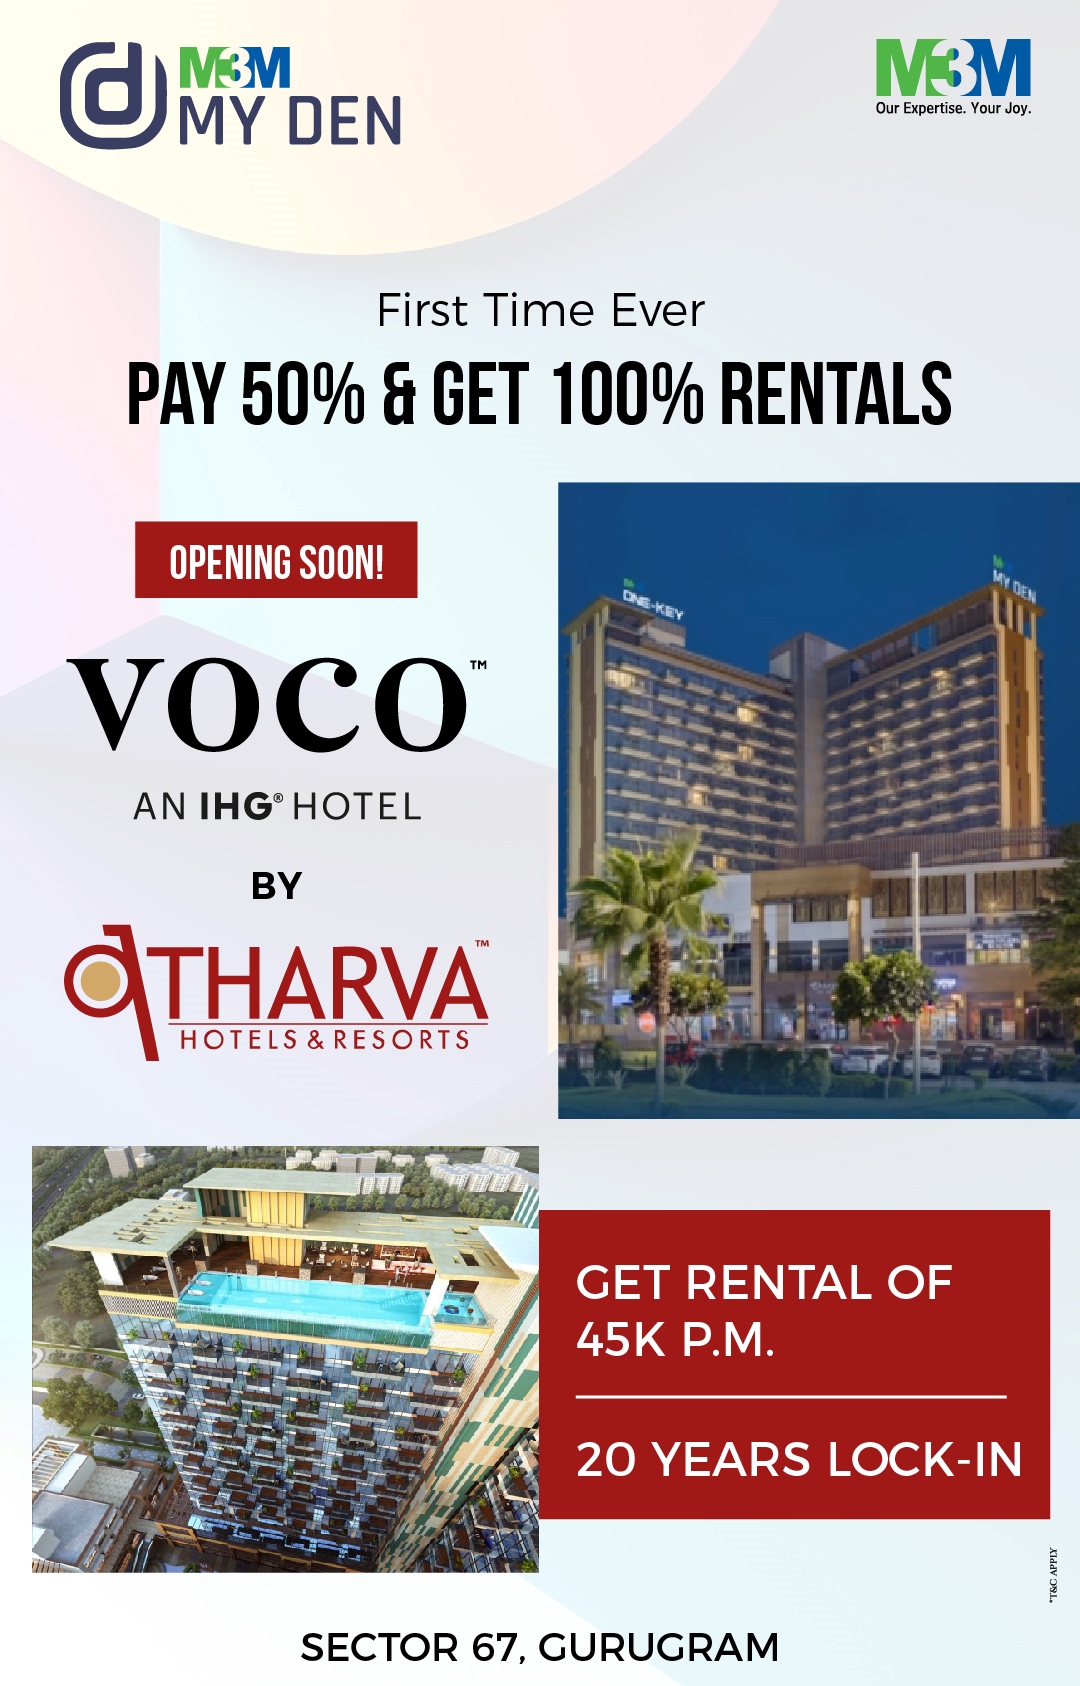 Frist time ever pay 50% and get 100% rentals at M3M My Den, Gurgaon Update